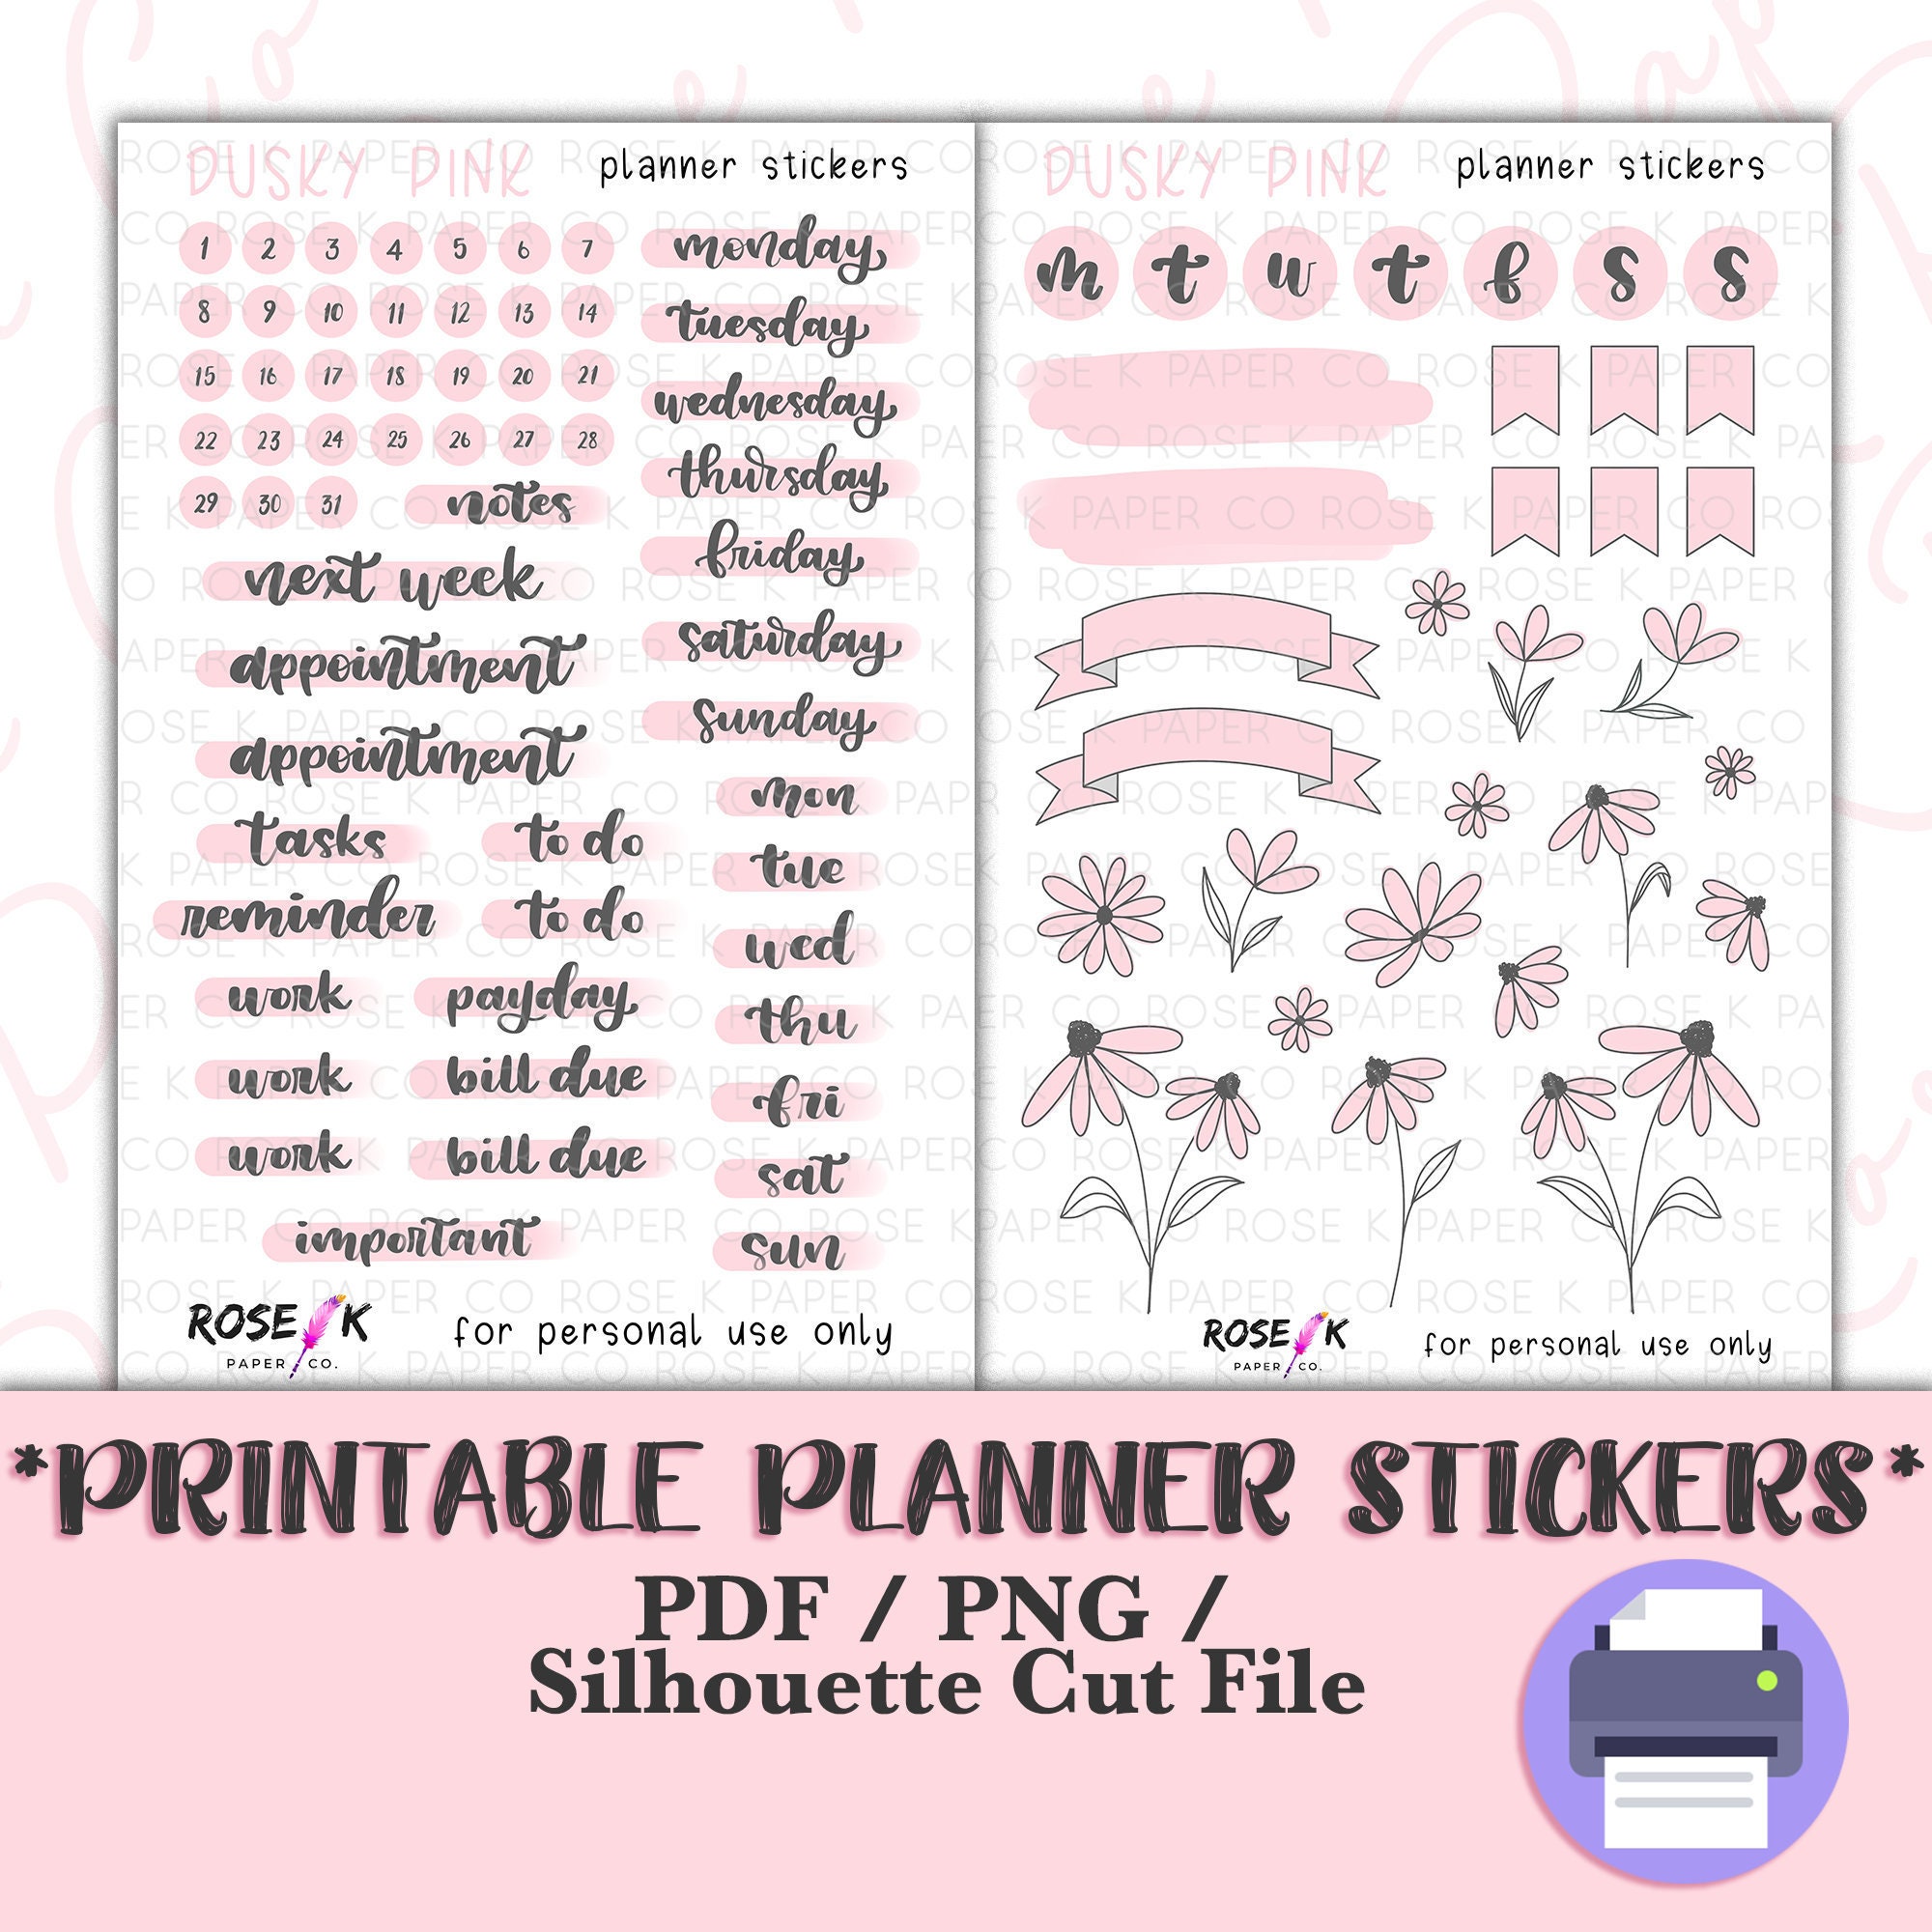 How To Make Printable Stickers For Your Bullet Journal